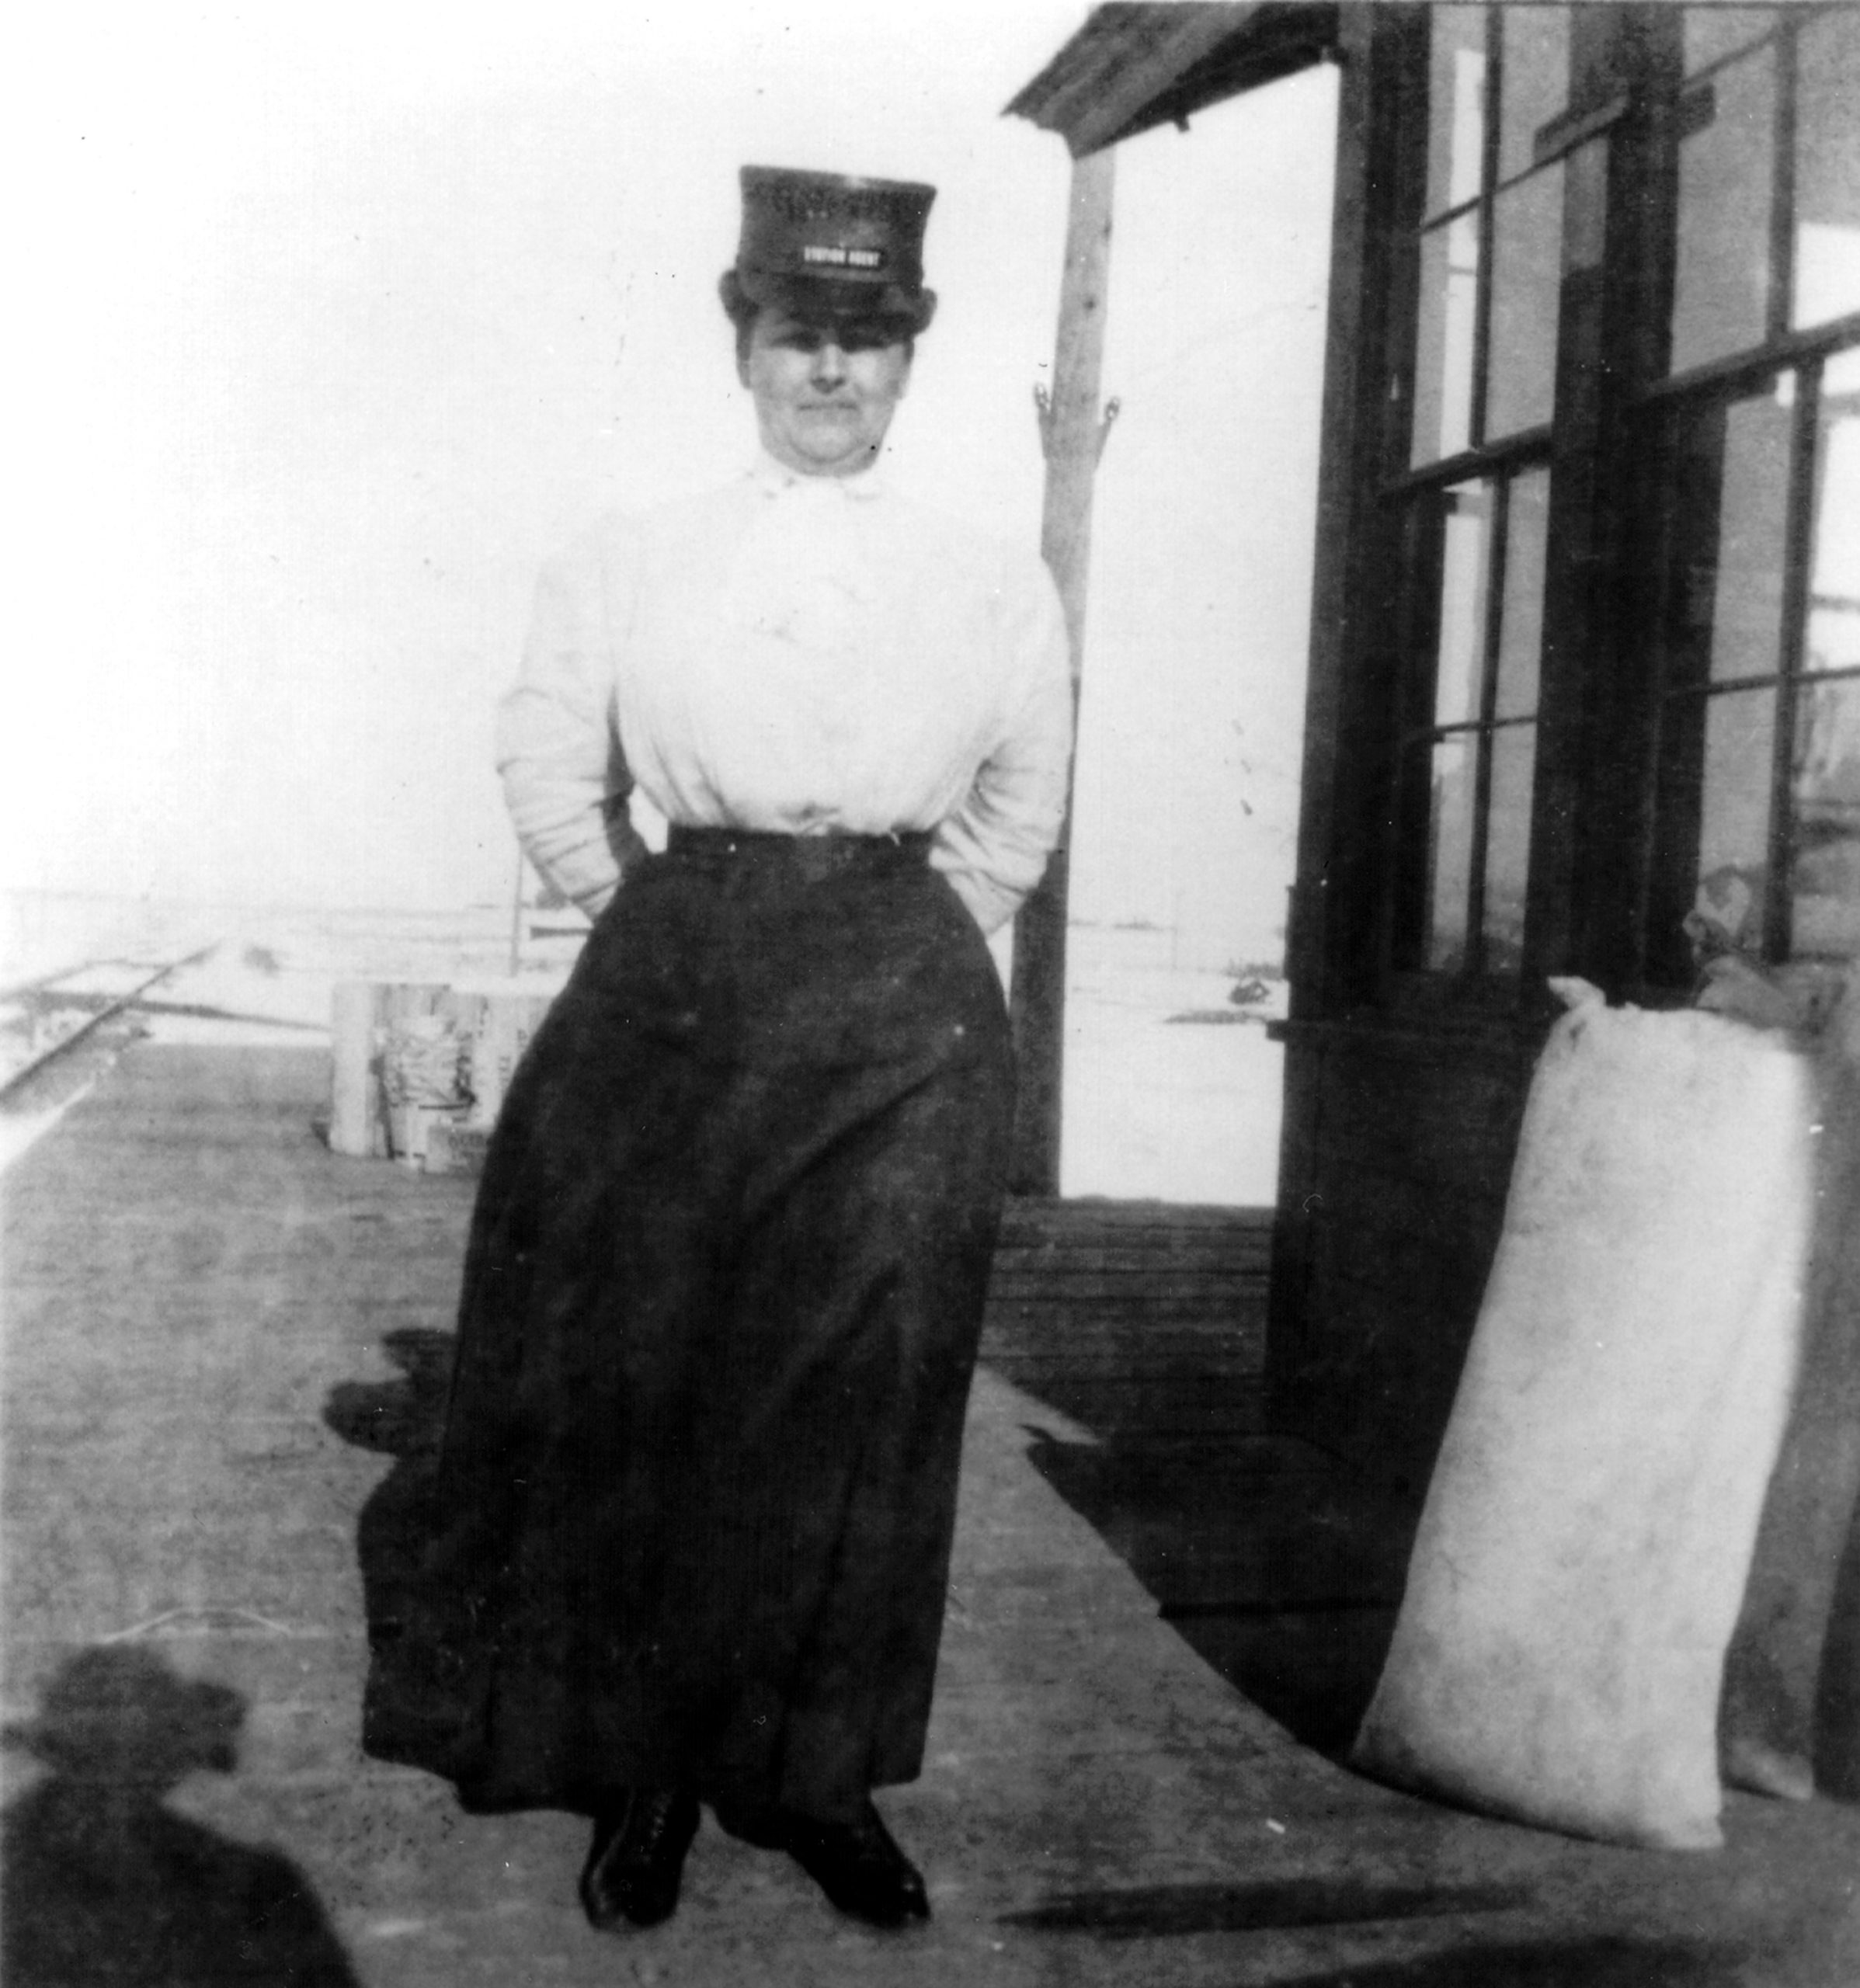 A black and white photo shows a woman wearing a blouse, skirt, and hat as she stands between train tracks and a building. Her hands are in her pockets, and full sacks are propped up against the building. A shadow is near her feet.